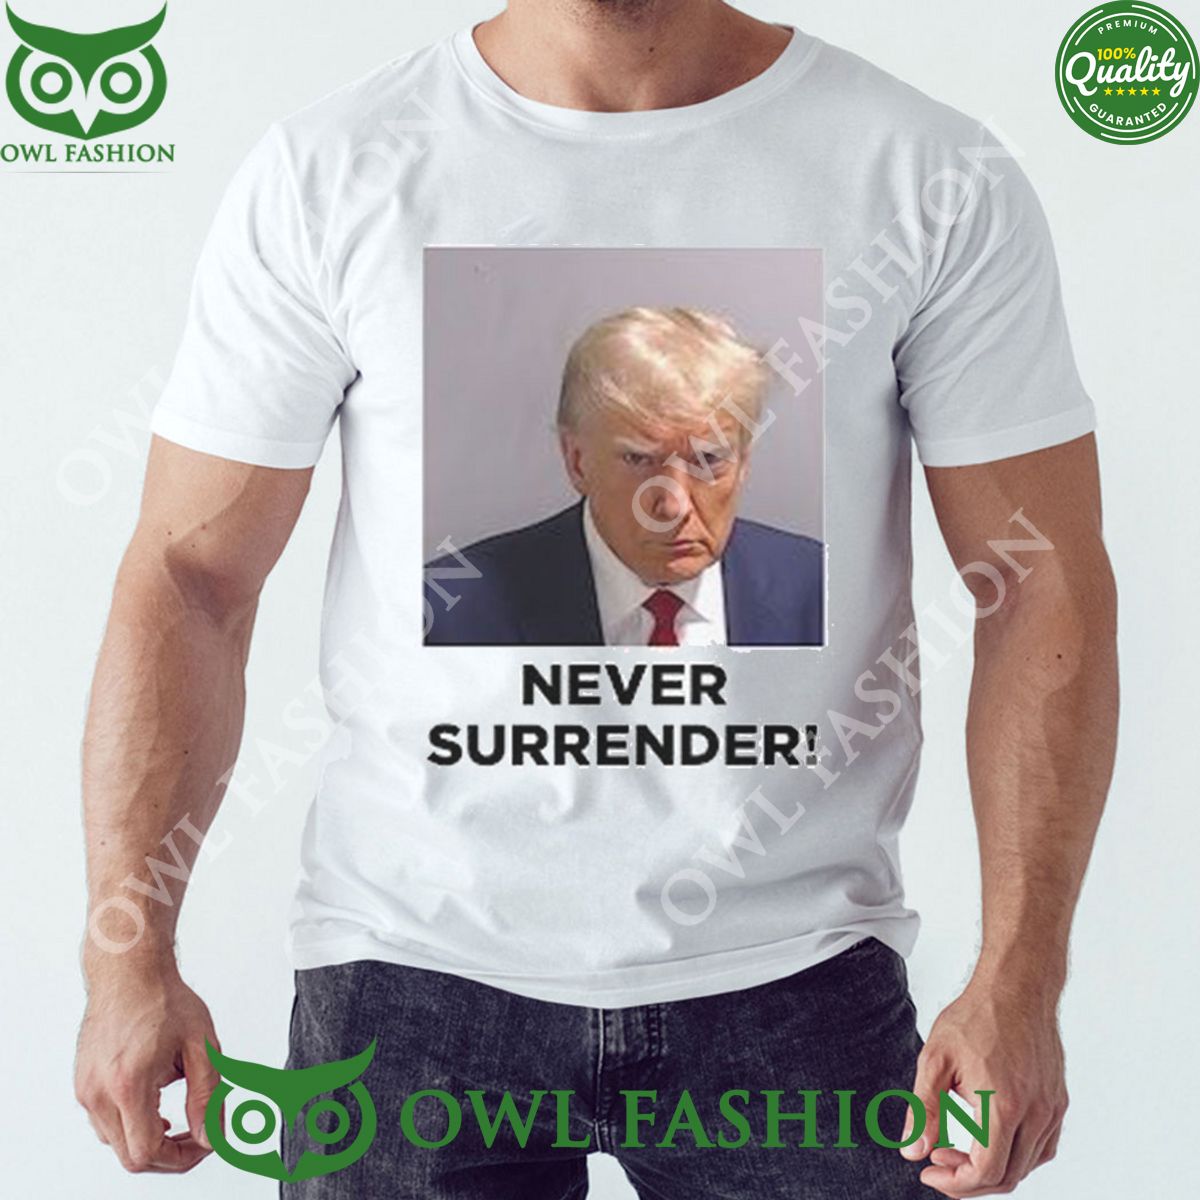 Trump 2024 Never Surrender Mugshot Tee Shirt You look so healthy and fit